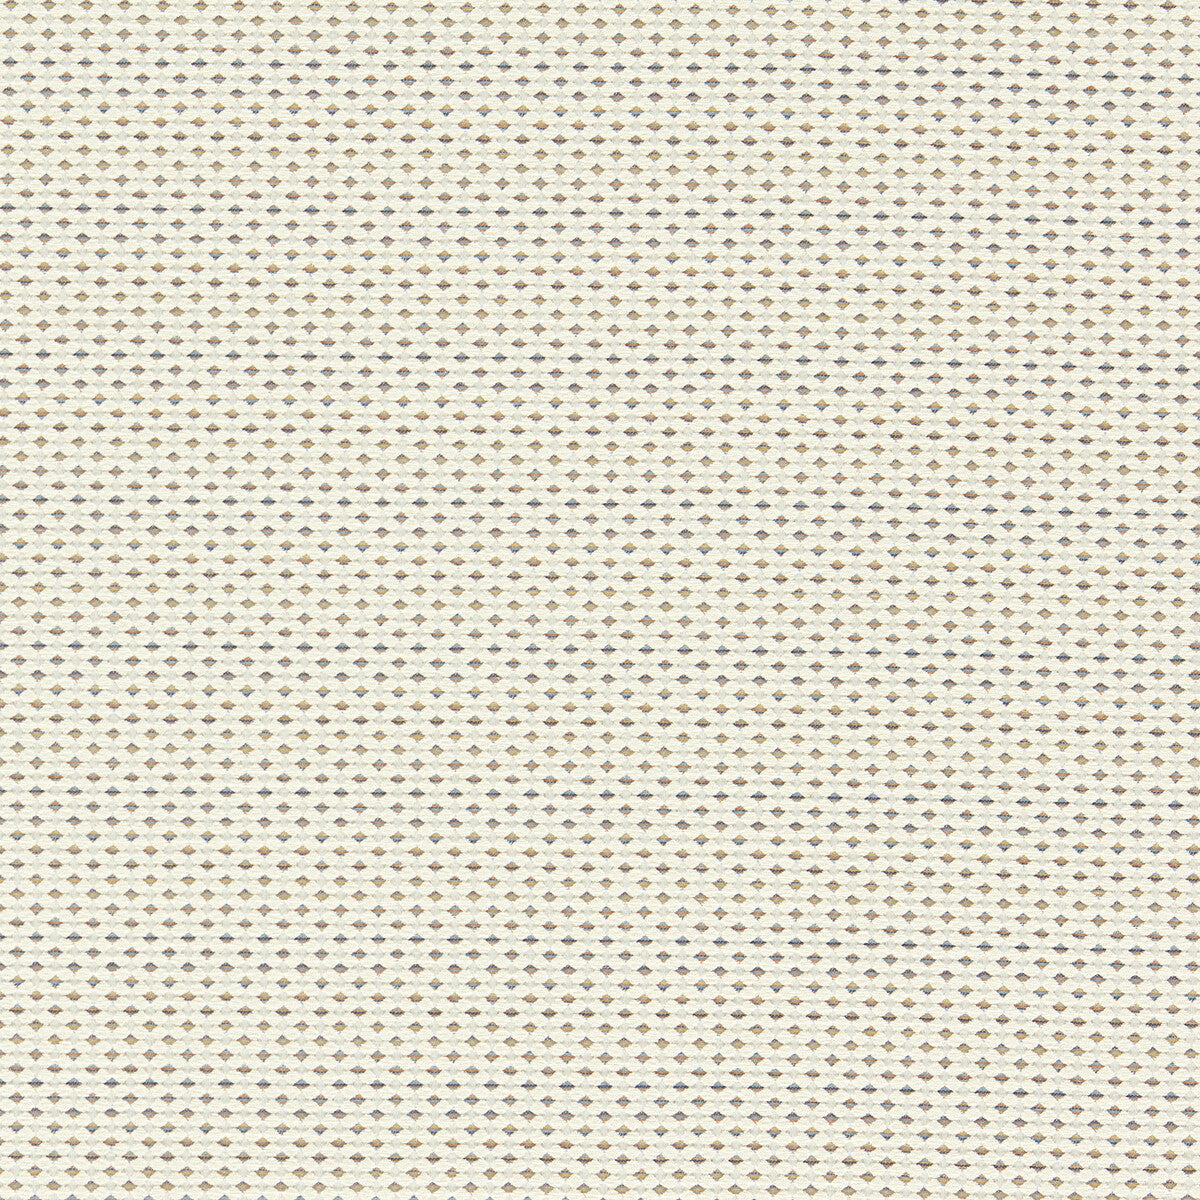 Pavo fabric in ivory/denim color - pattern F1620/03.CAC.0 - by Clarke And Clarke in the Clarke And Clarke Equinox 2 collection